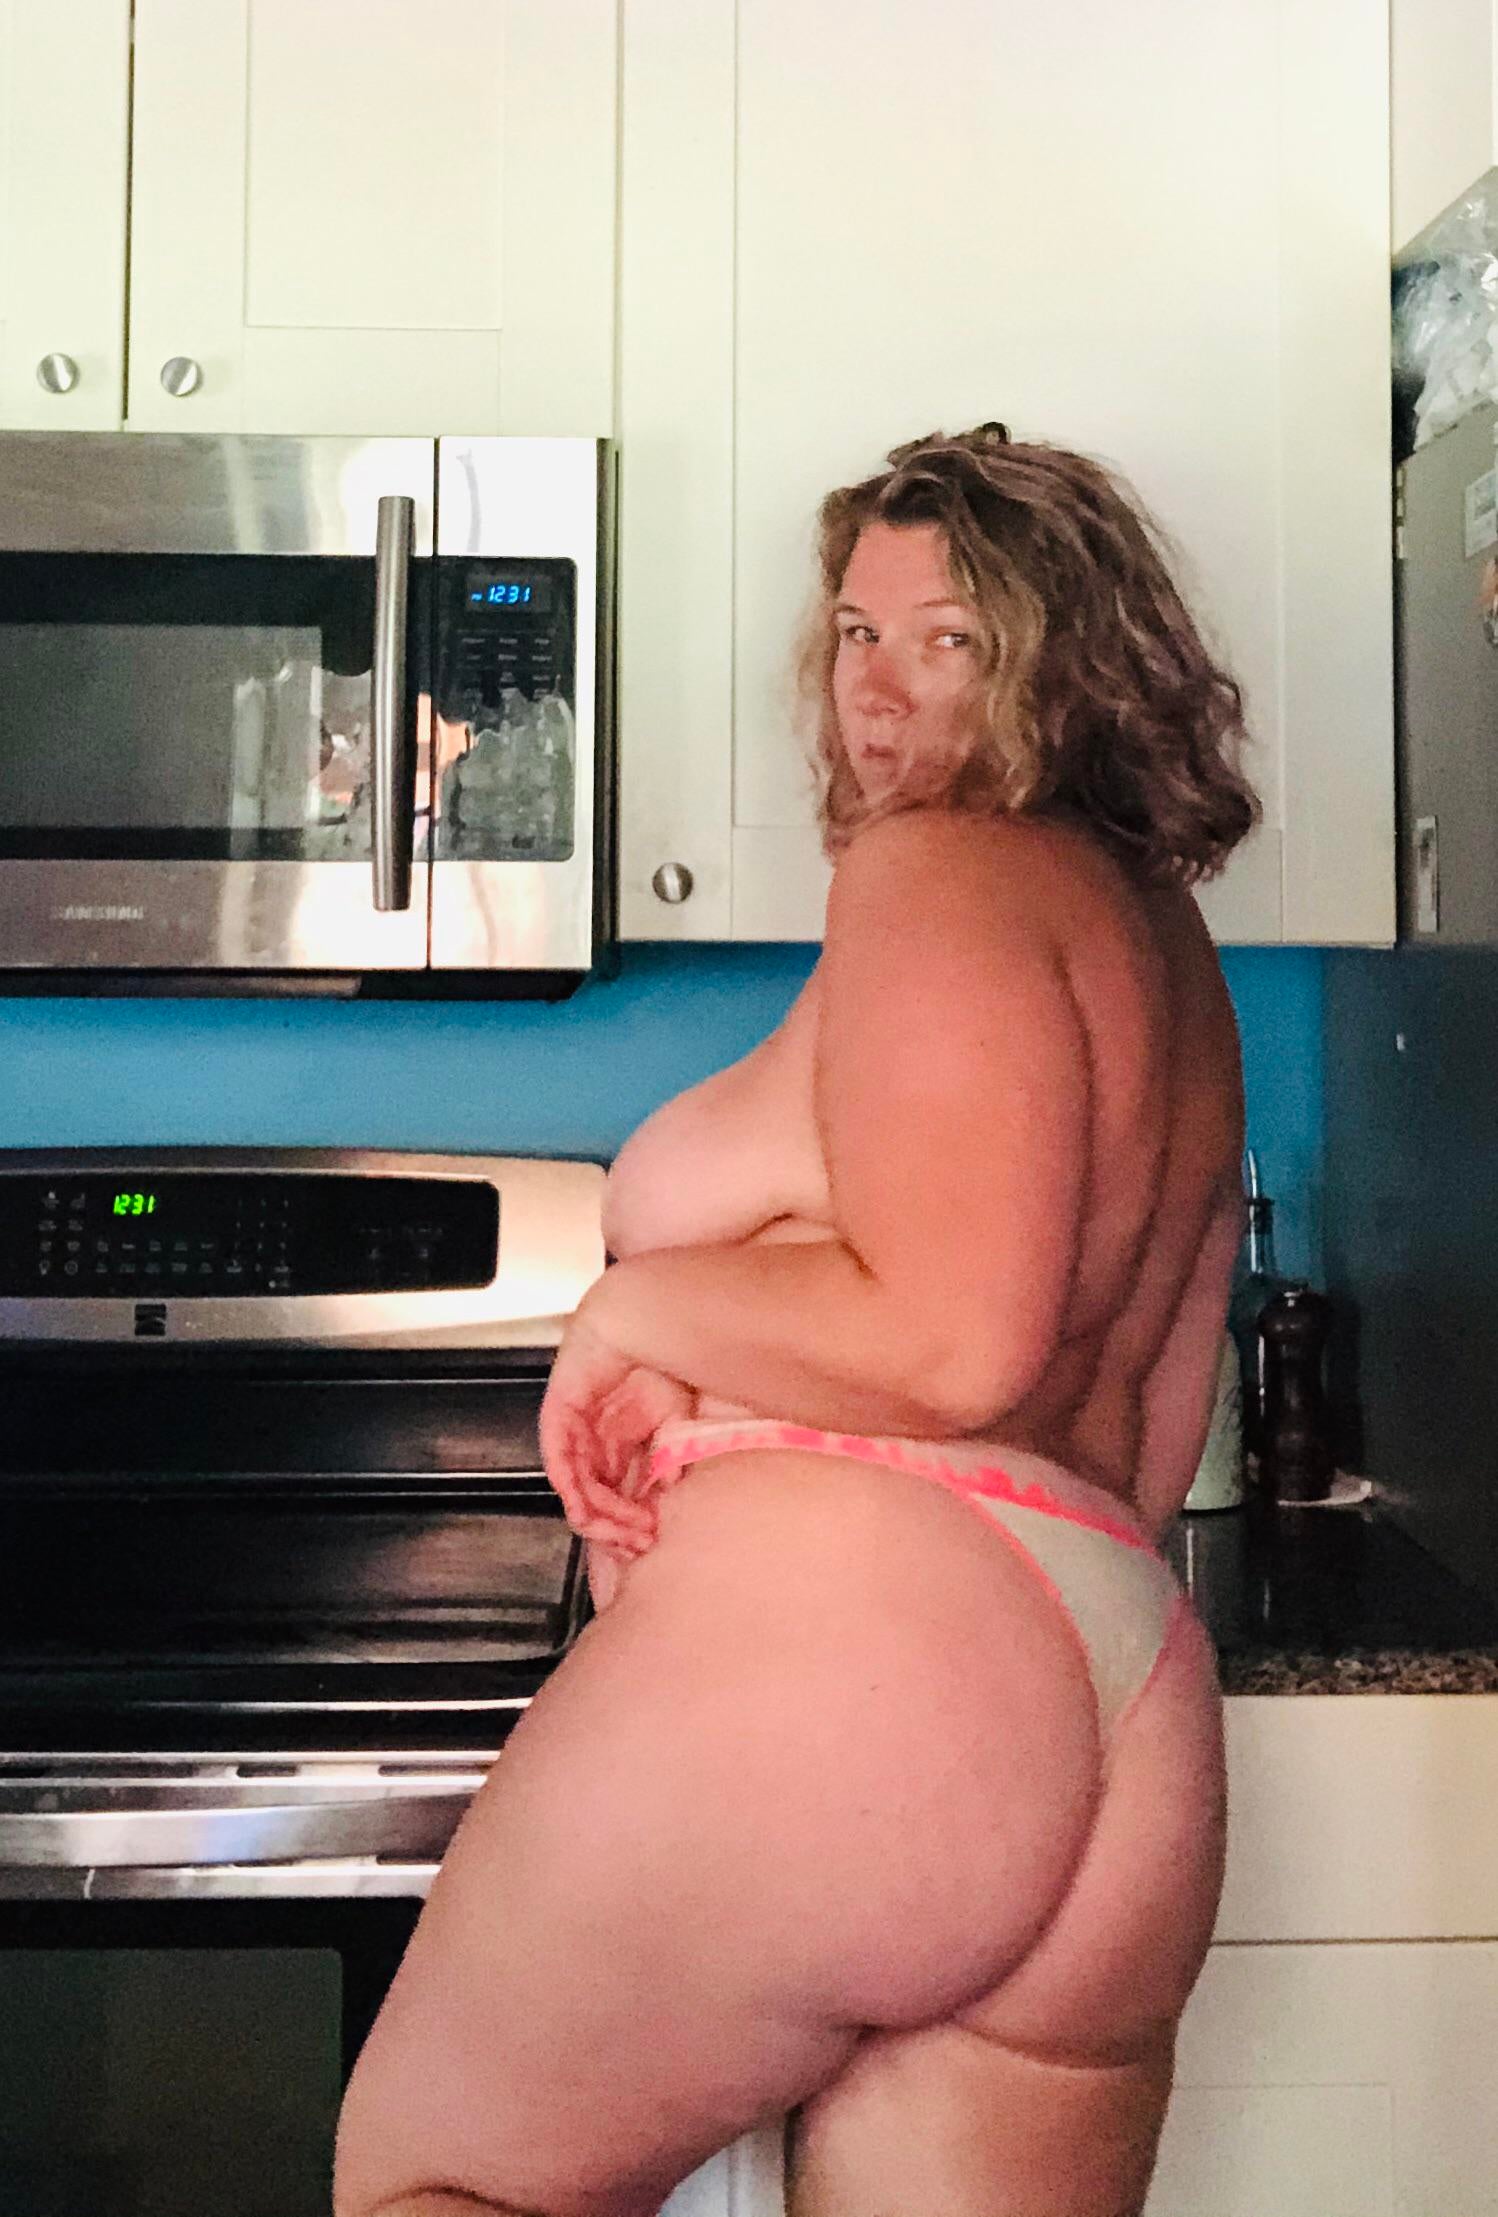 PAWG What should I whip up in the kitchen